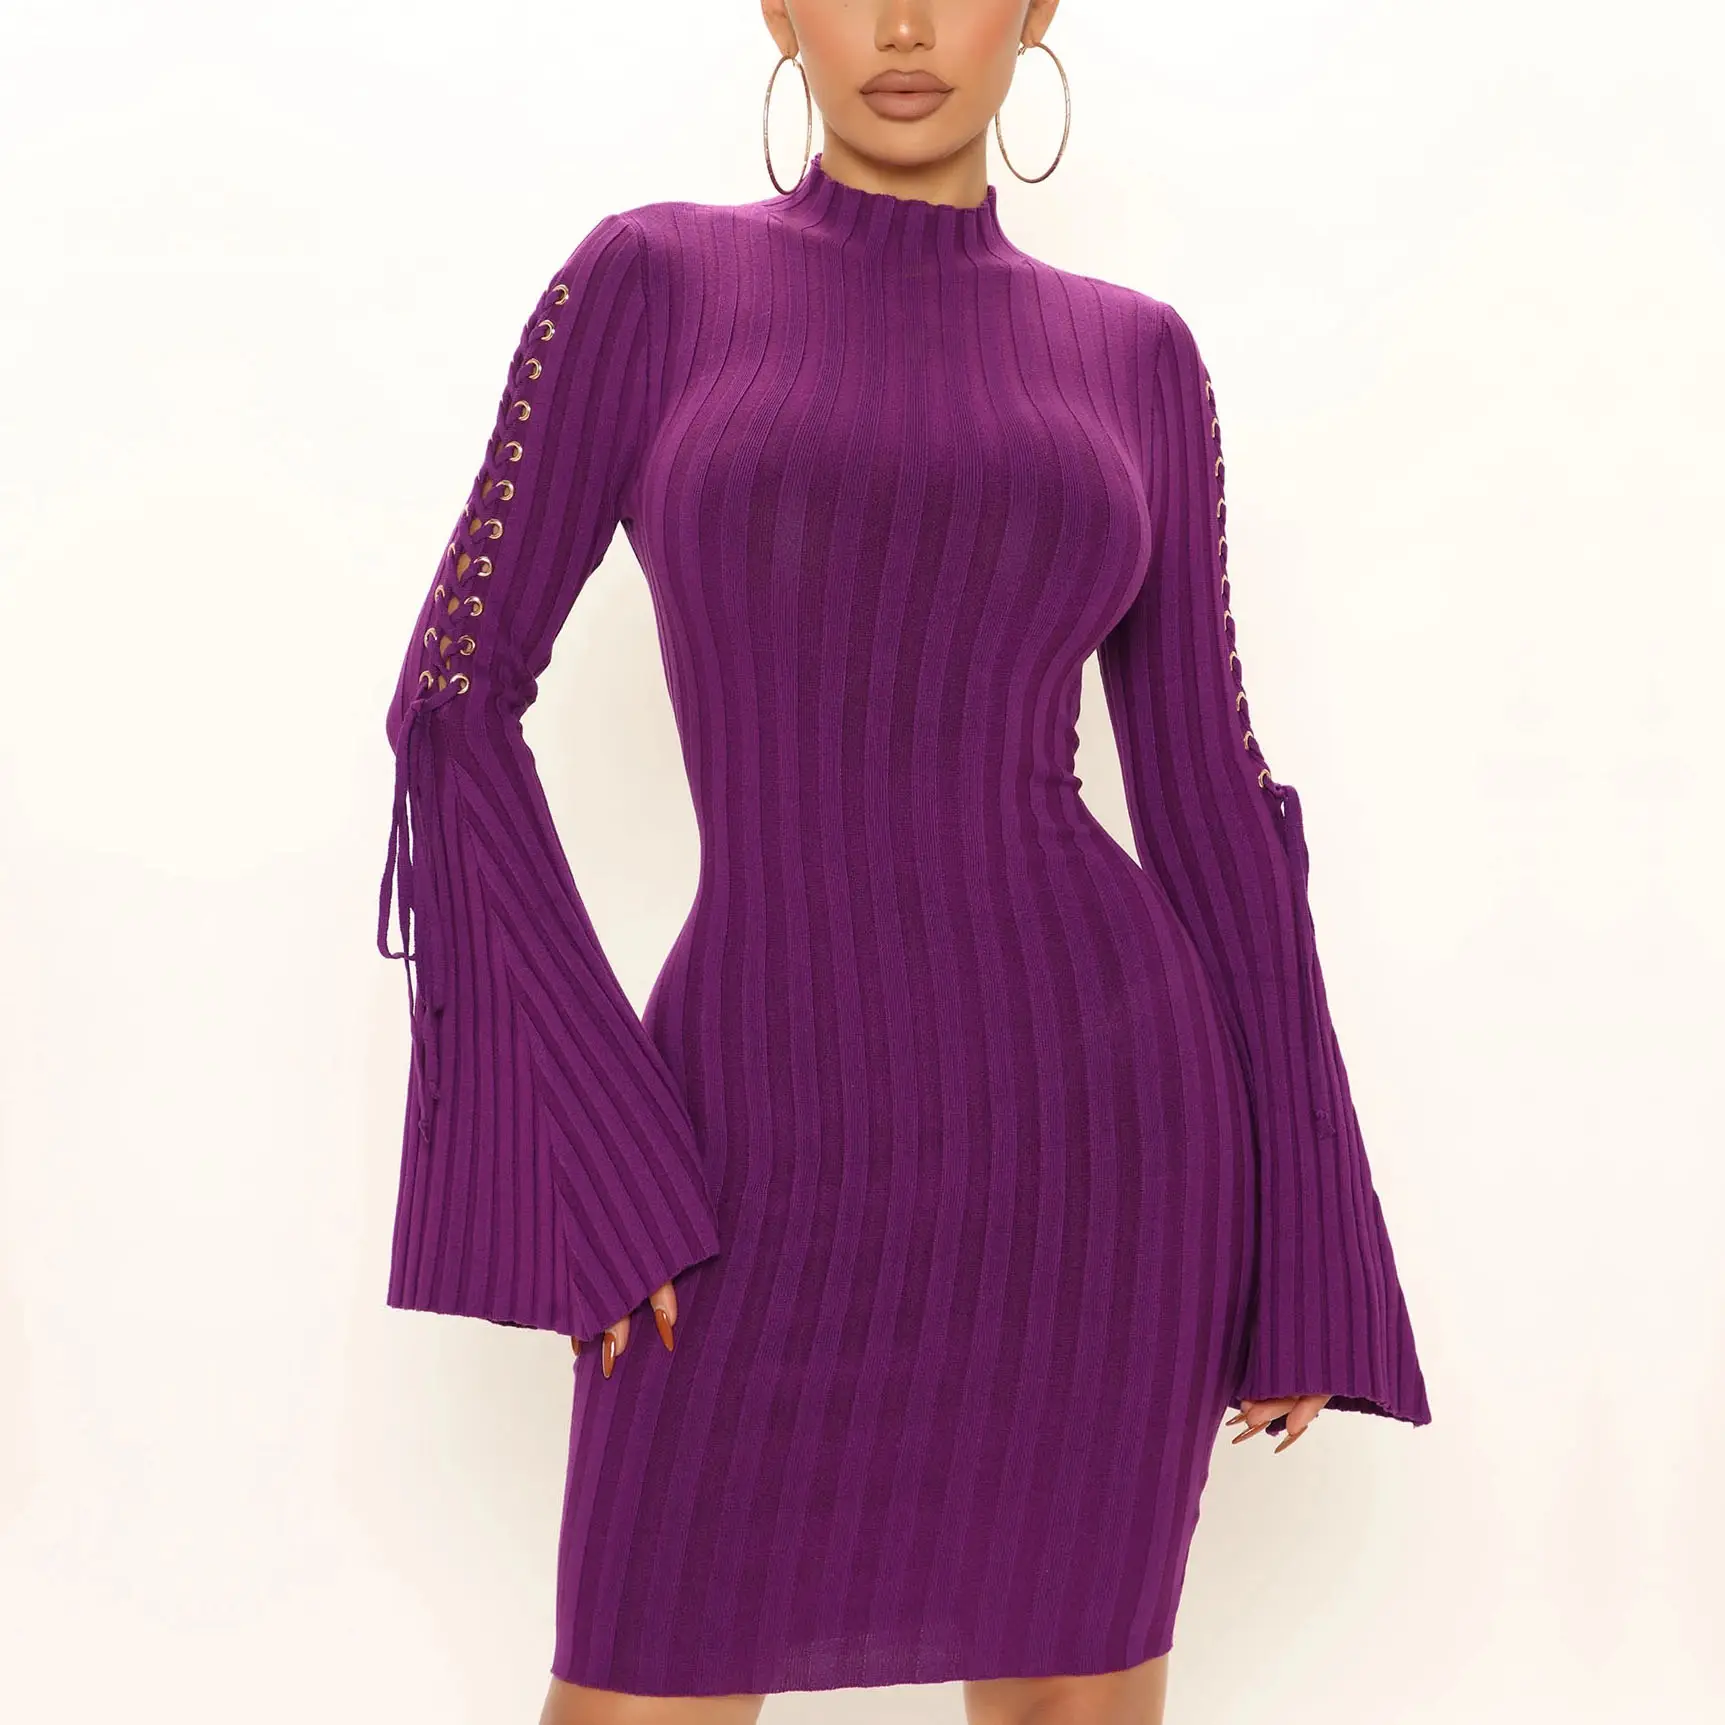 Fashion Fall Winter Clothing High Quality Cotton Knit Purple Color Plain Lace Up Flare Long Sleeve Women Sweater Dress